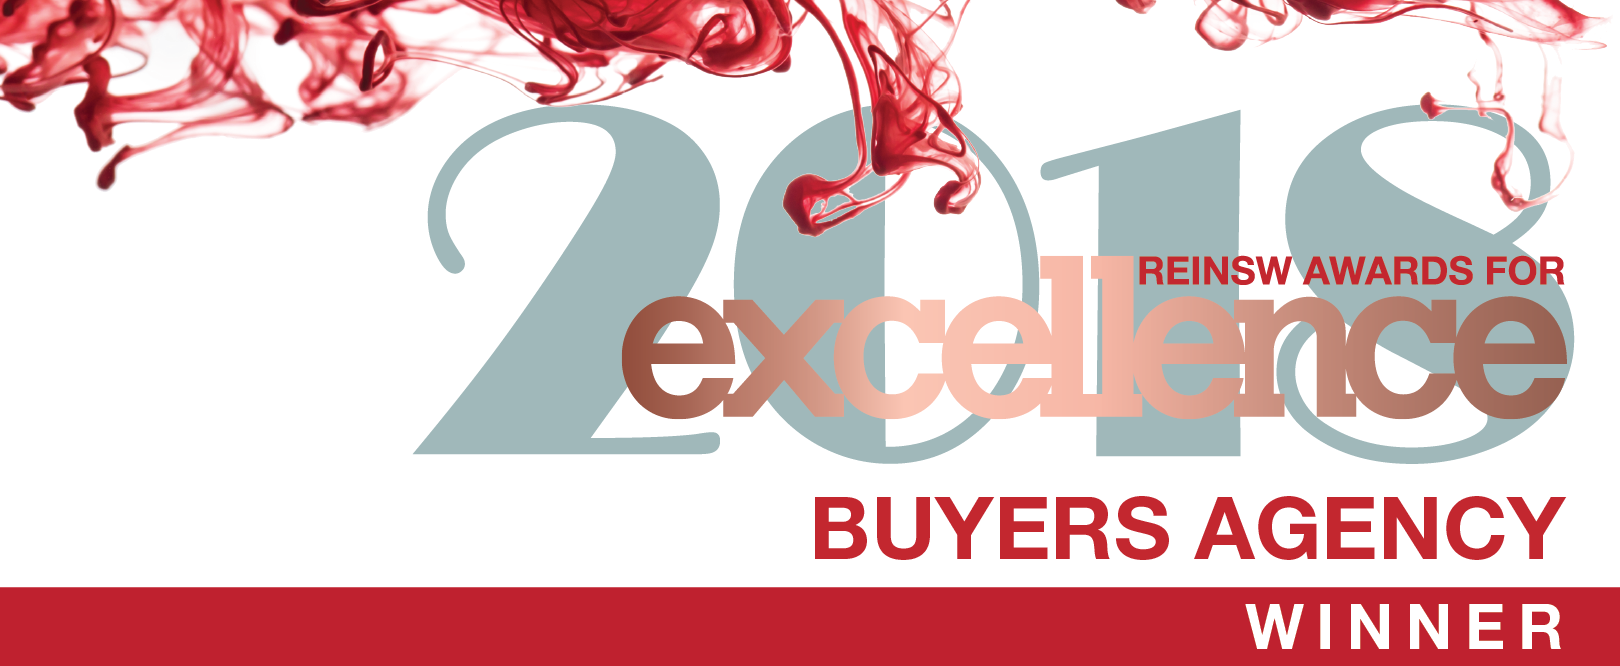 Winner – 2018 Award for Excellence Buyers’ Agency Real Estate Institute of NSW (REINSW) Awards for Excellence